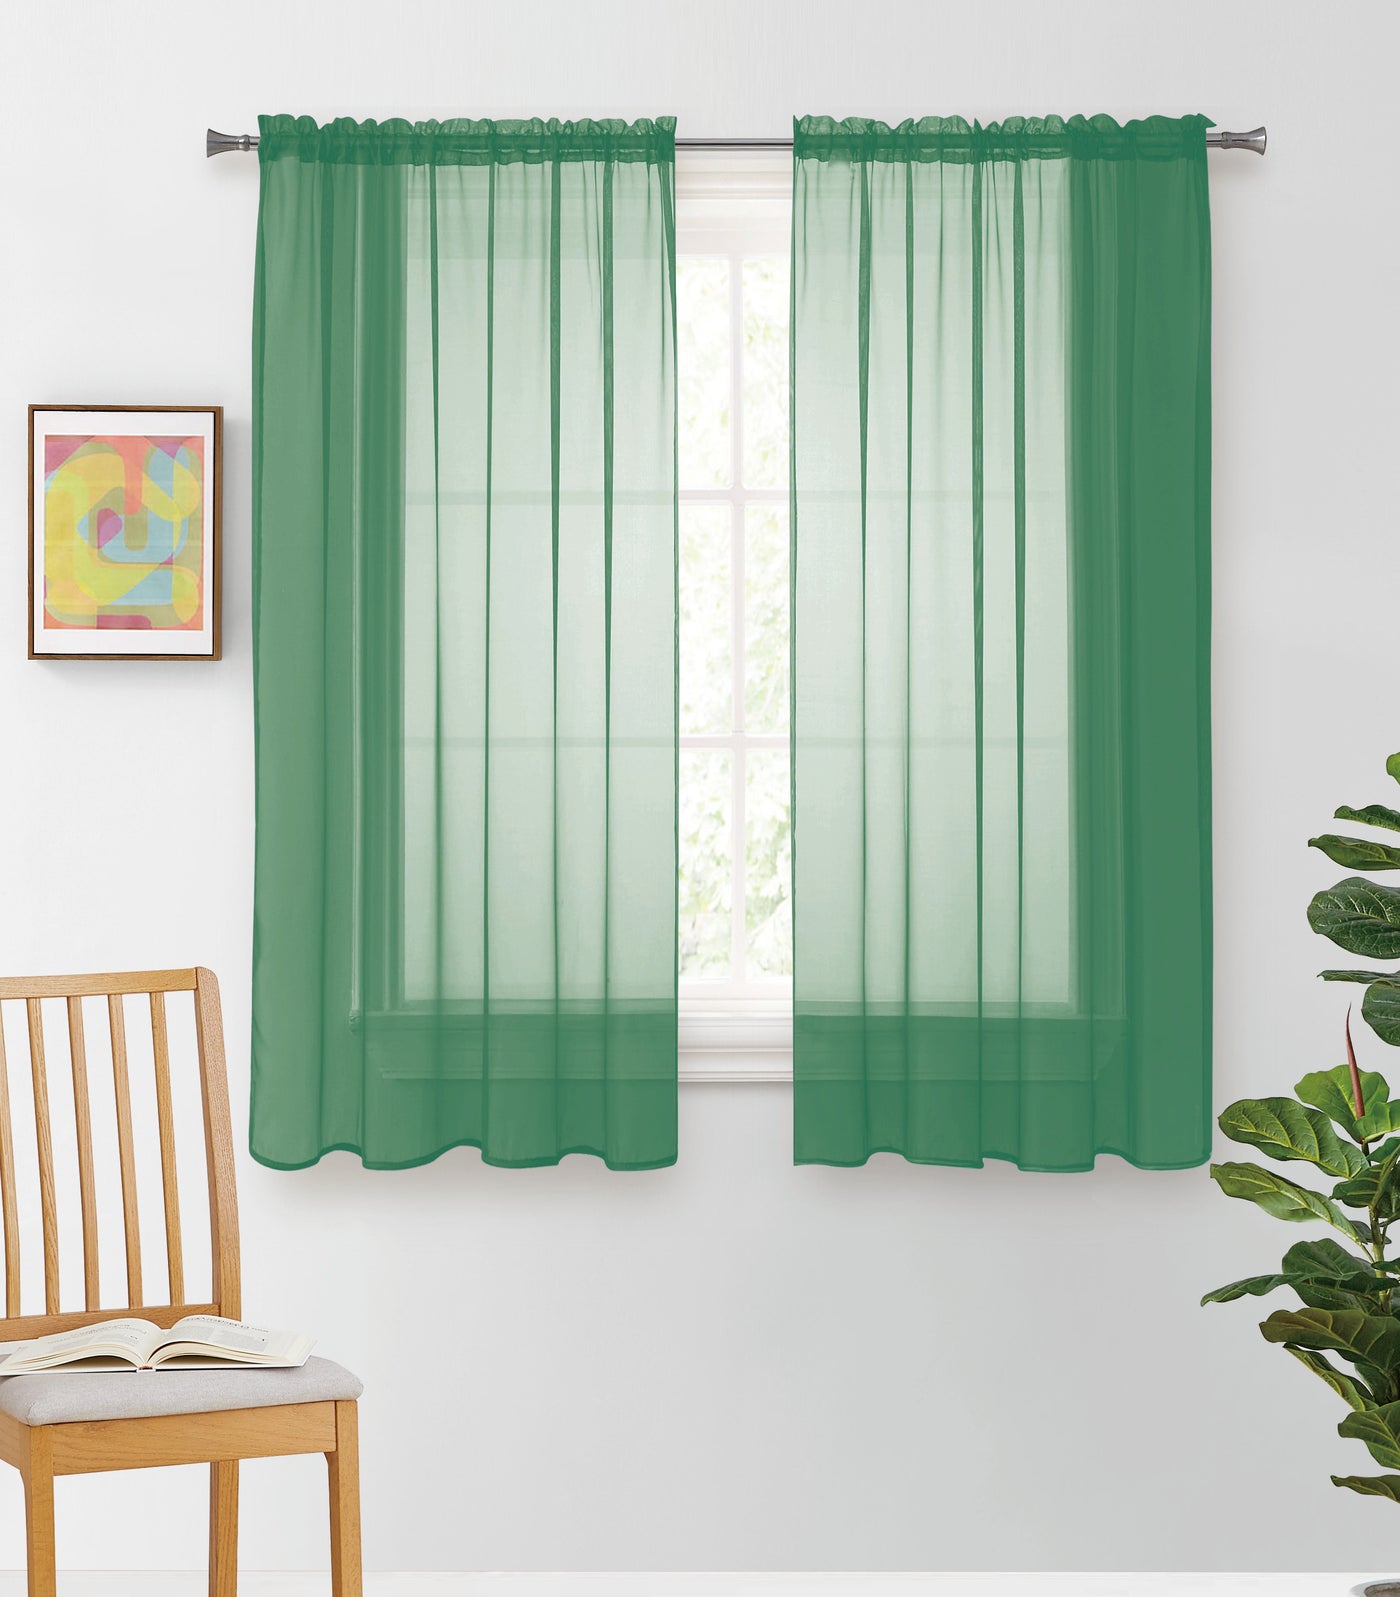 Solid Voile Rod Pocket Sheer Curtains for Bedroom Drapes Set of 2 45" Curtains for Bedroom Panels Window Treatment Home Decor 45" - Jenin-Home-Furnishing.CURTAINS